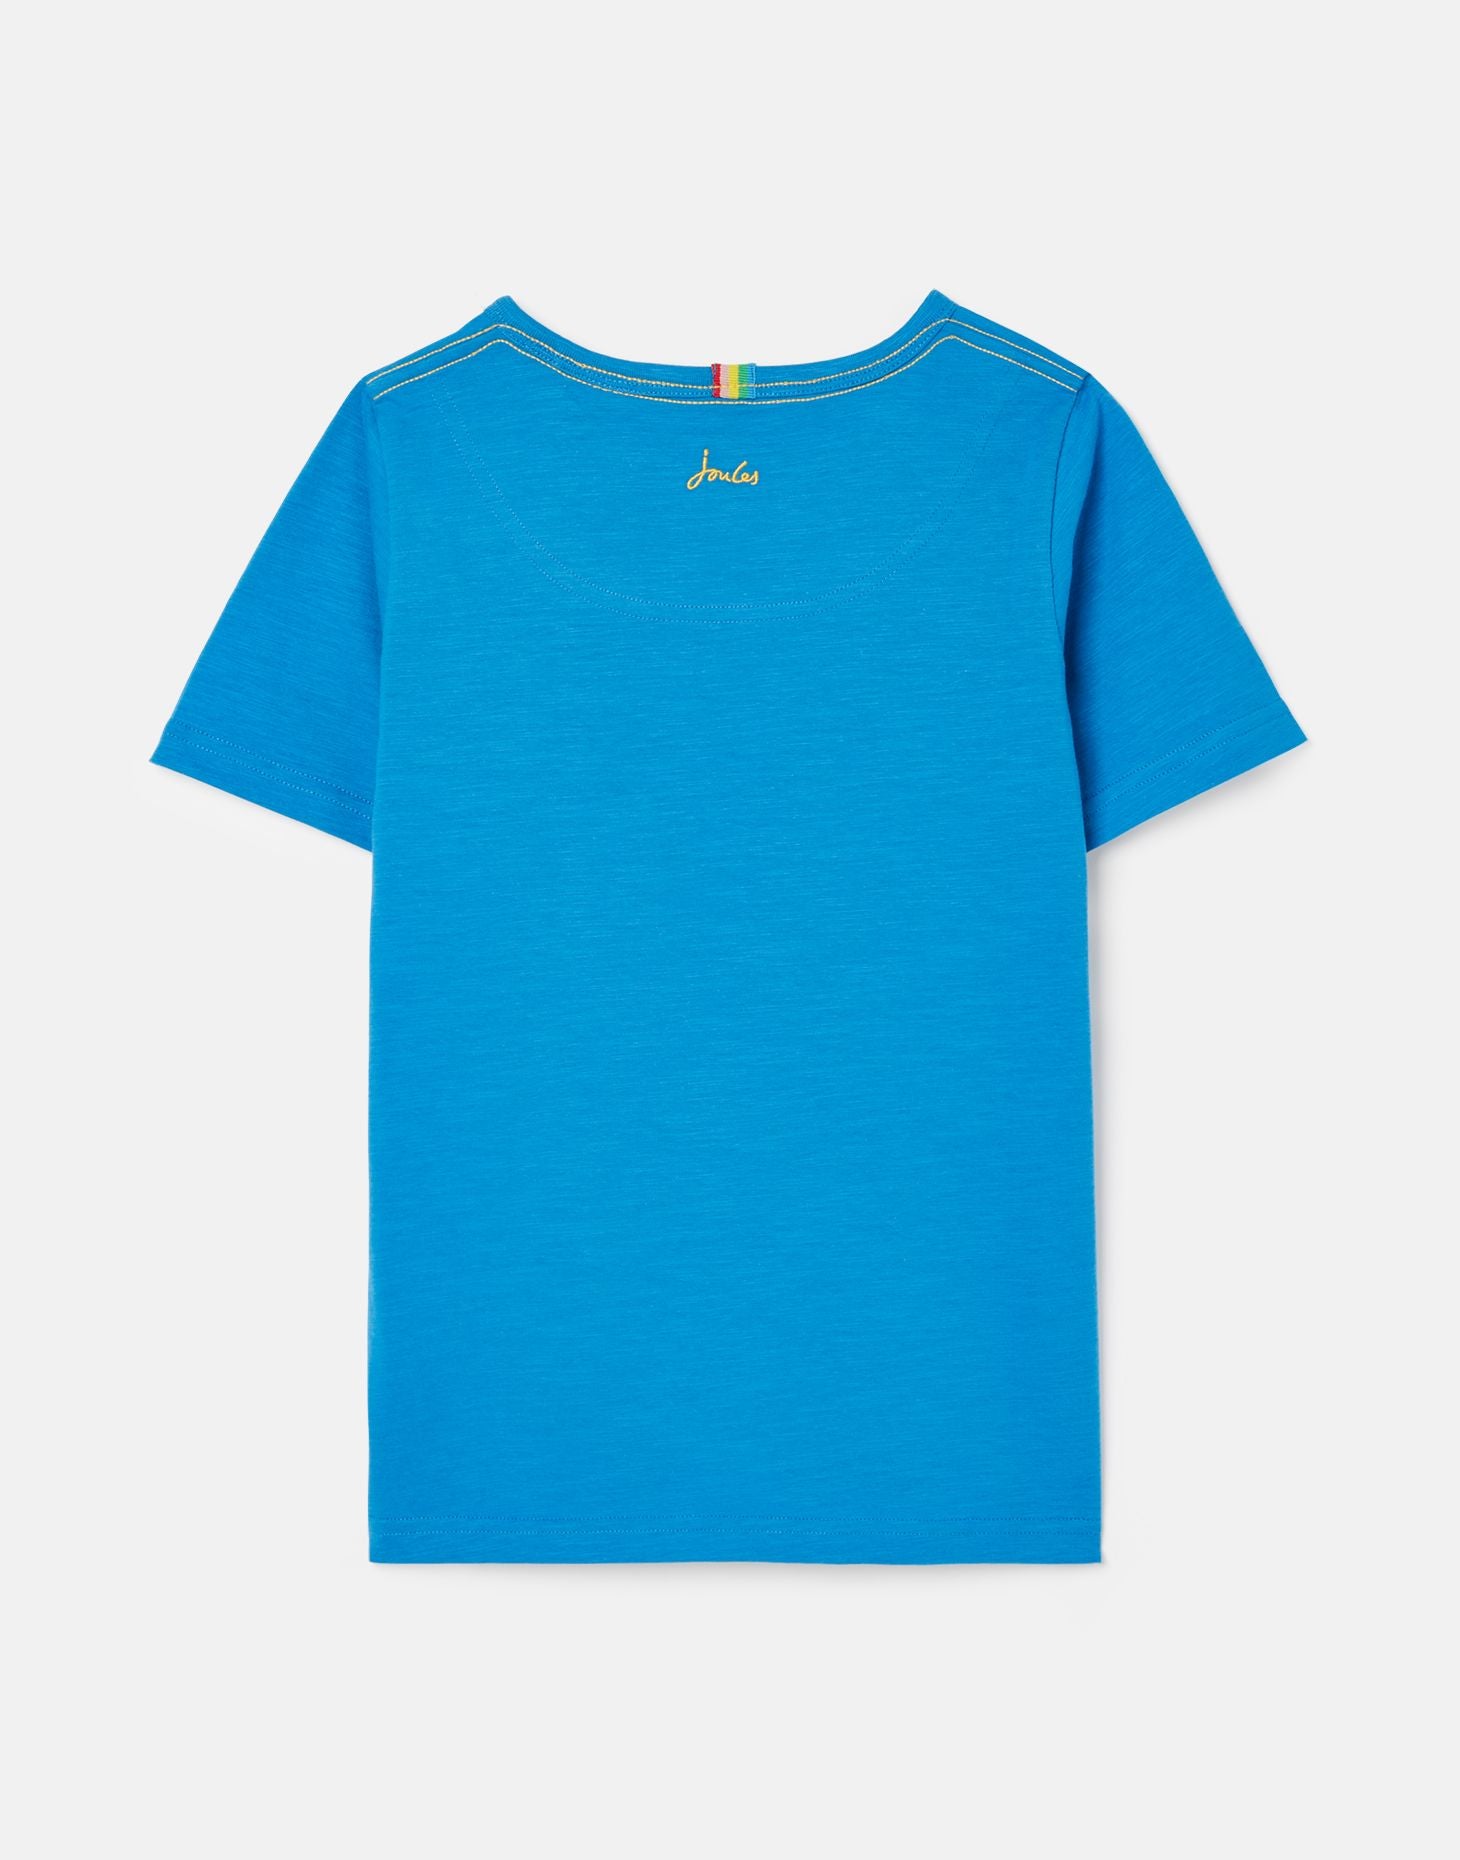 Joules Laundered T shirt.